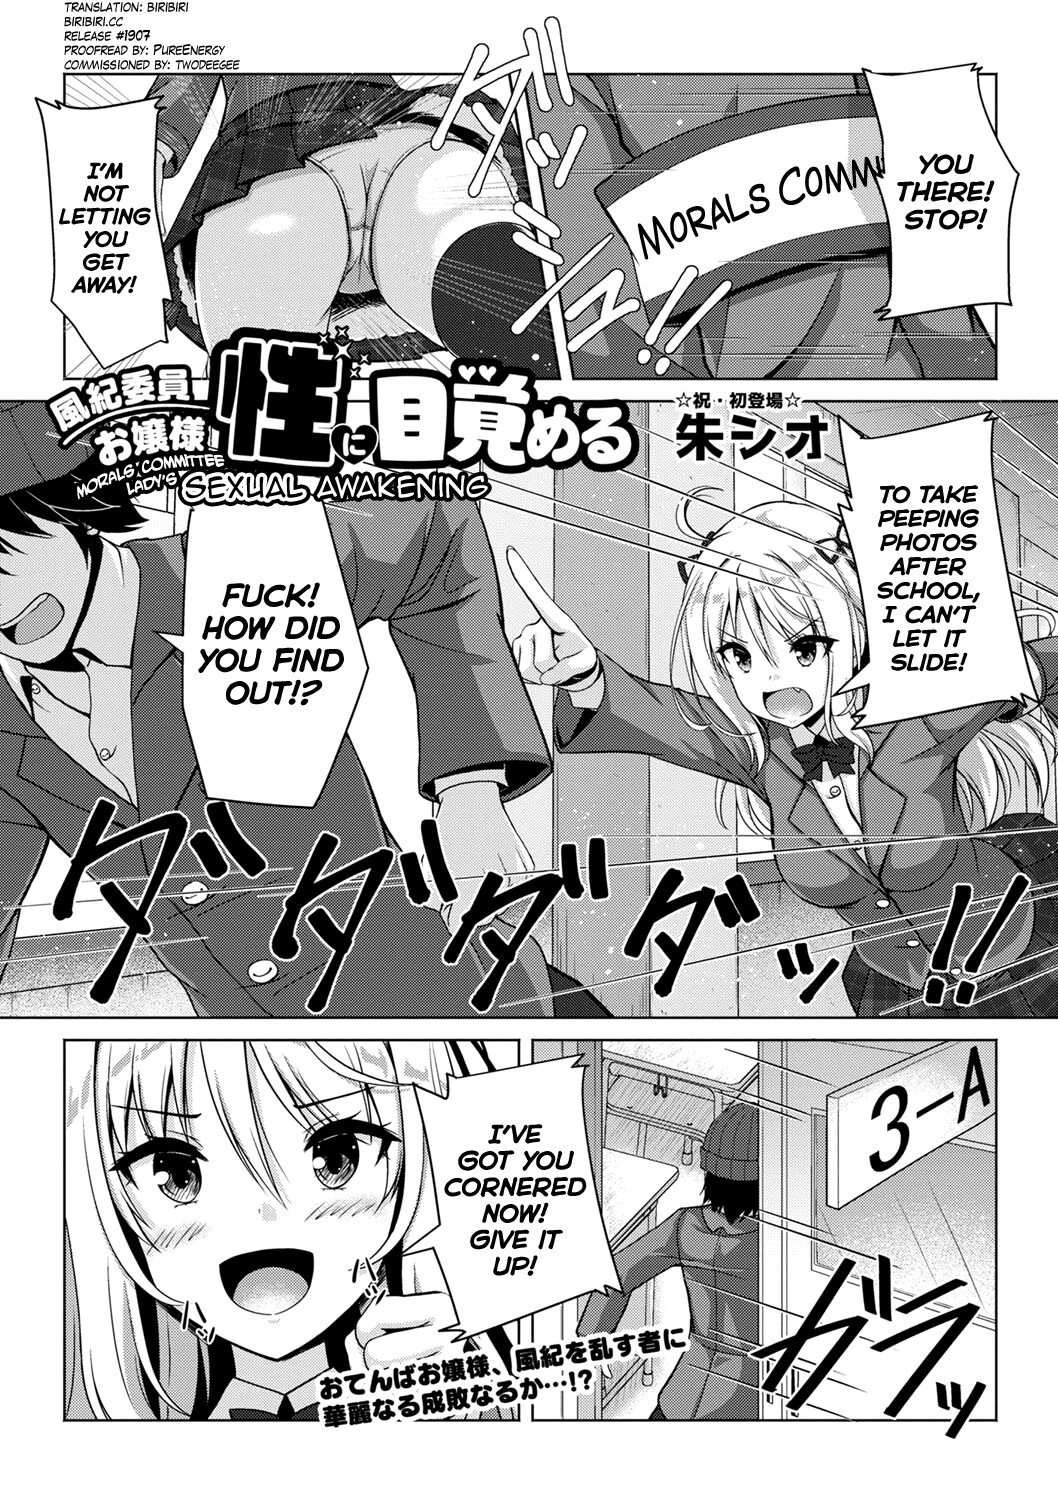 Hentai Manga Comic-A young lady on the public morals committee awakens to sexuality.-Read-1